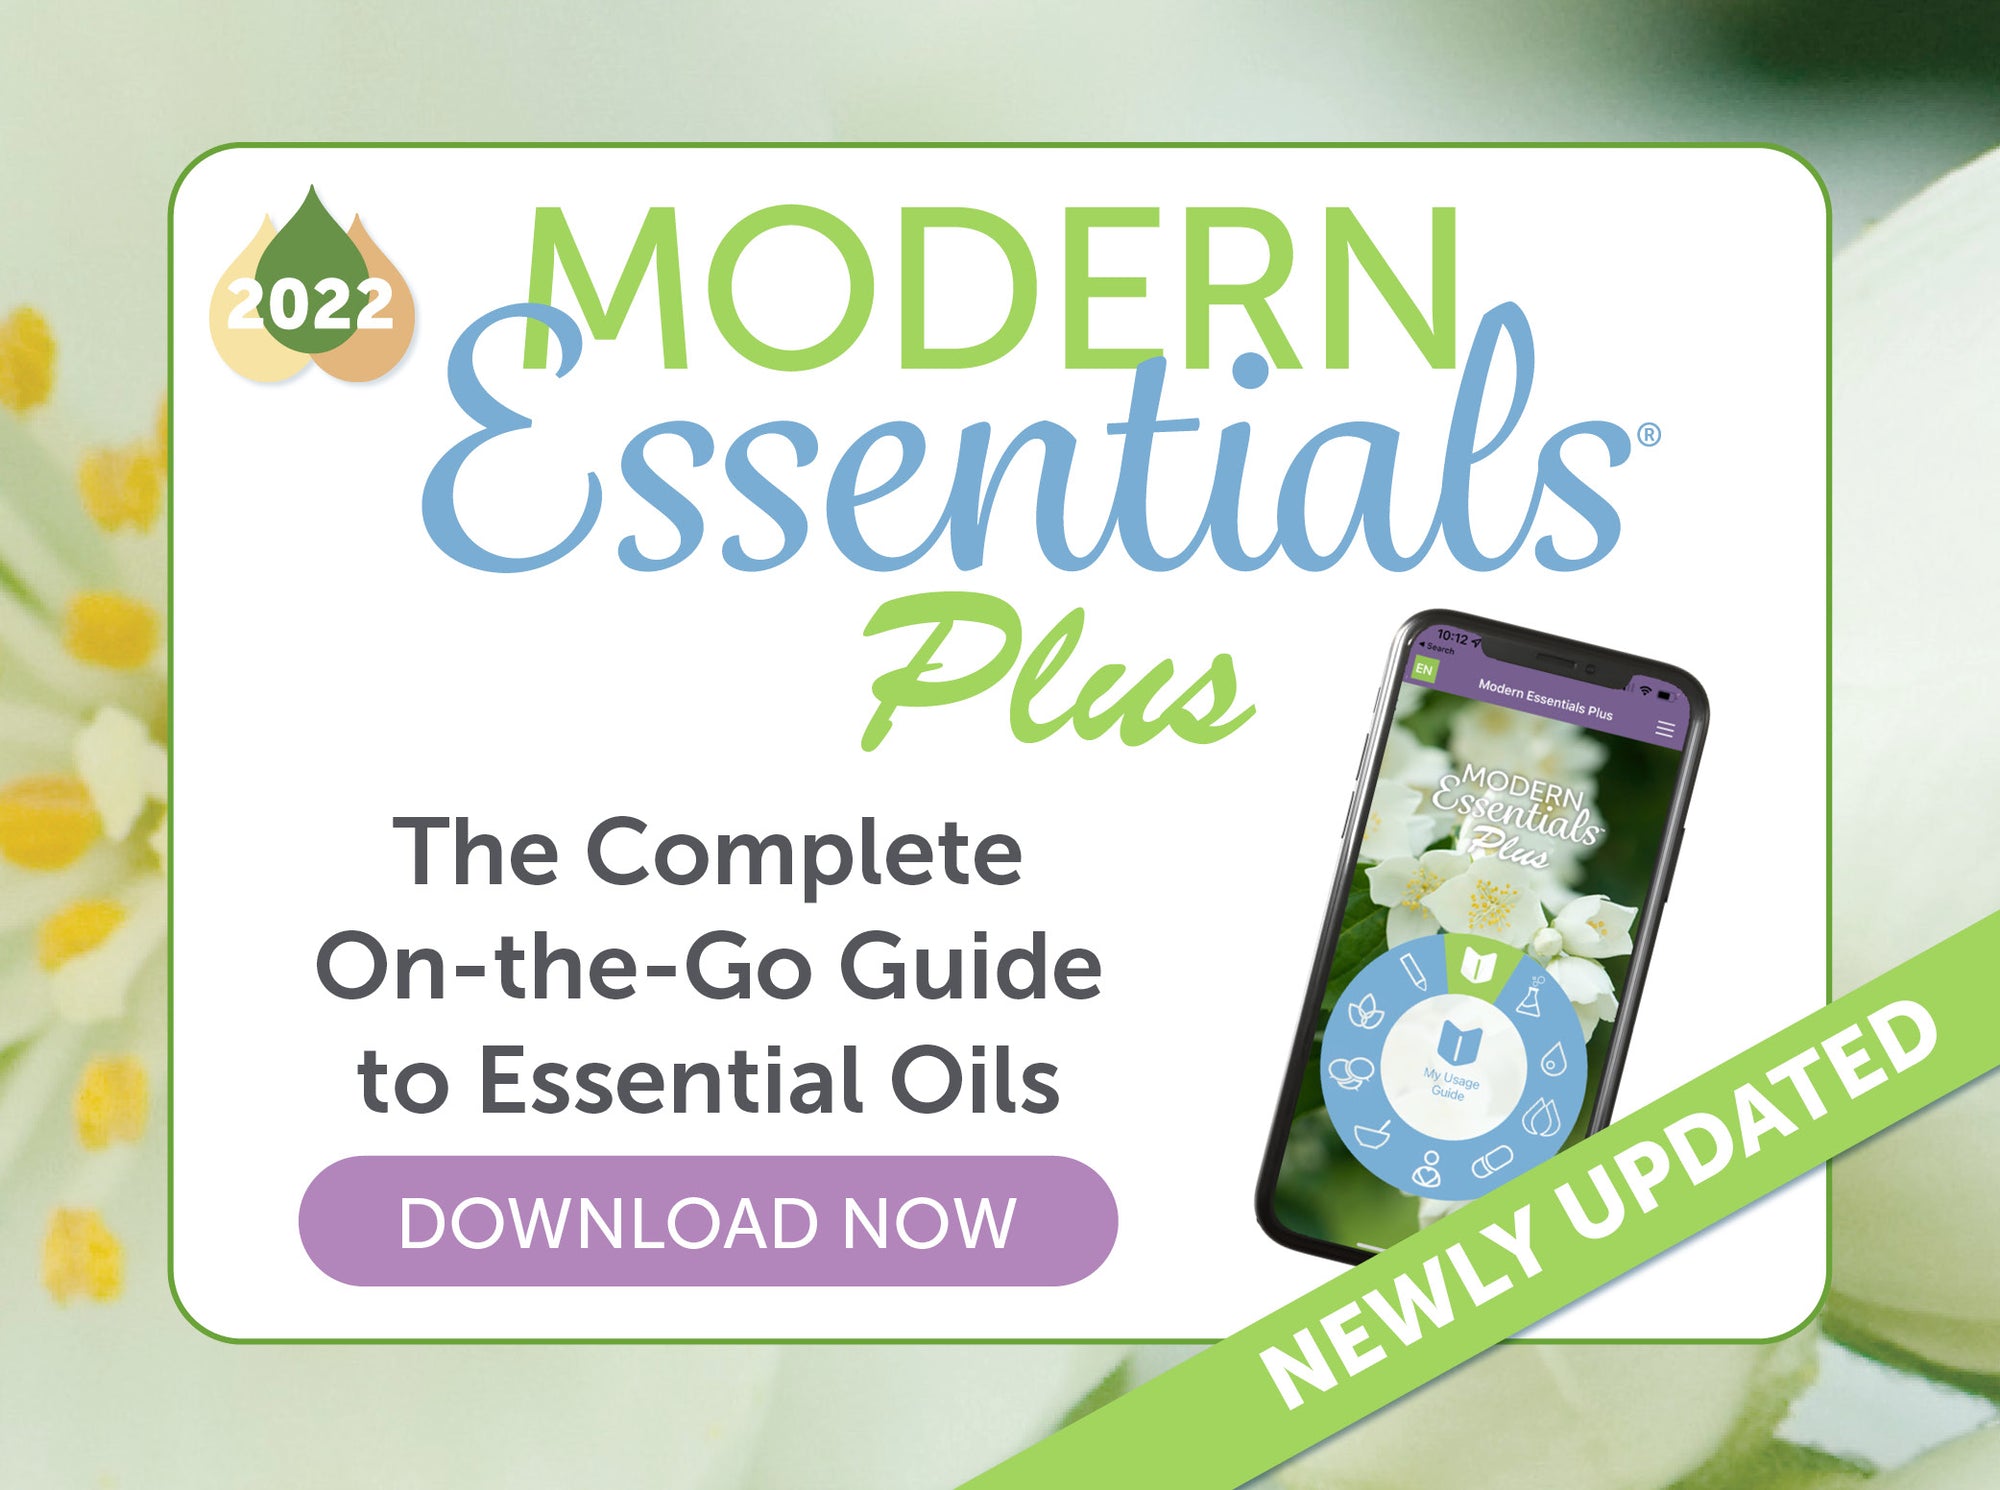 Modern Essentials Plus: The Complete On-the-Go Guide to Essential Oils